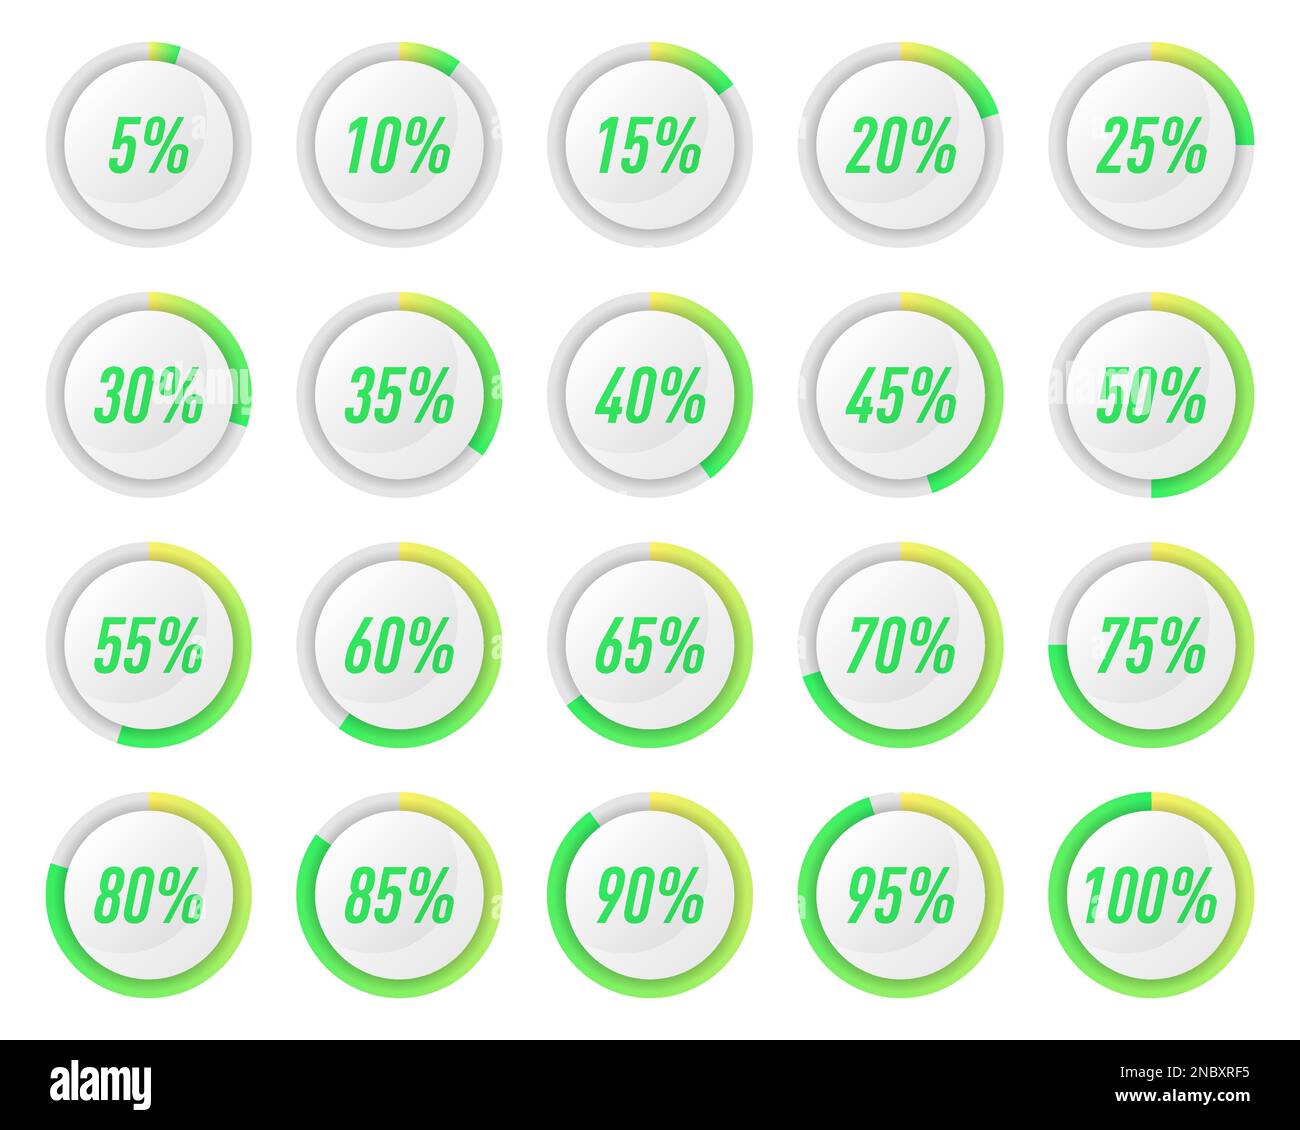 Collection of green circle percentage diagrams for infographics Stock Vector